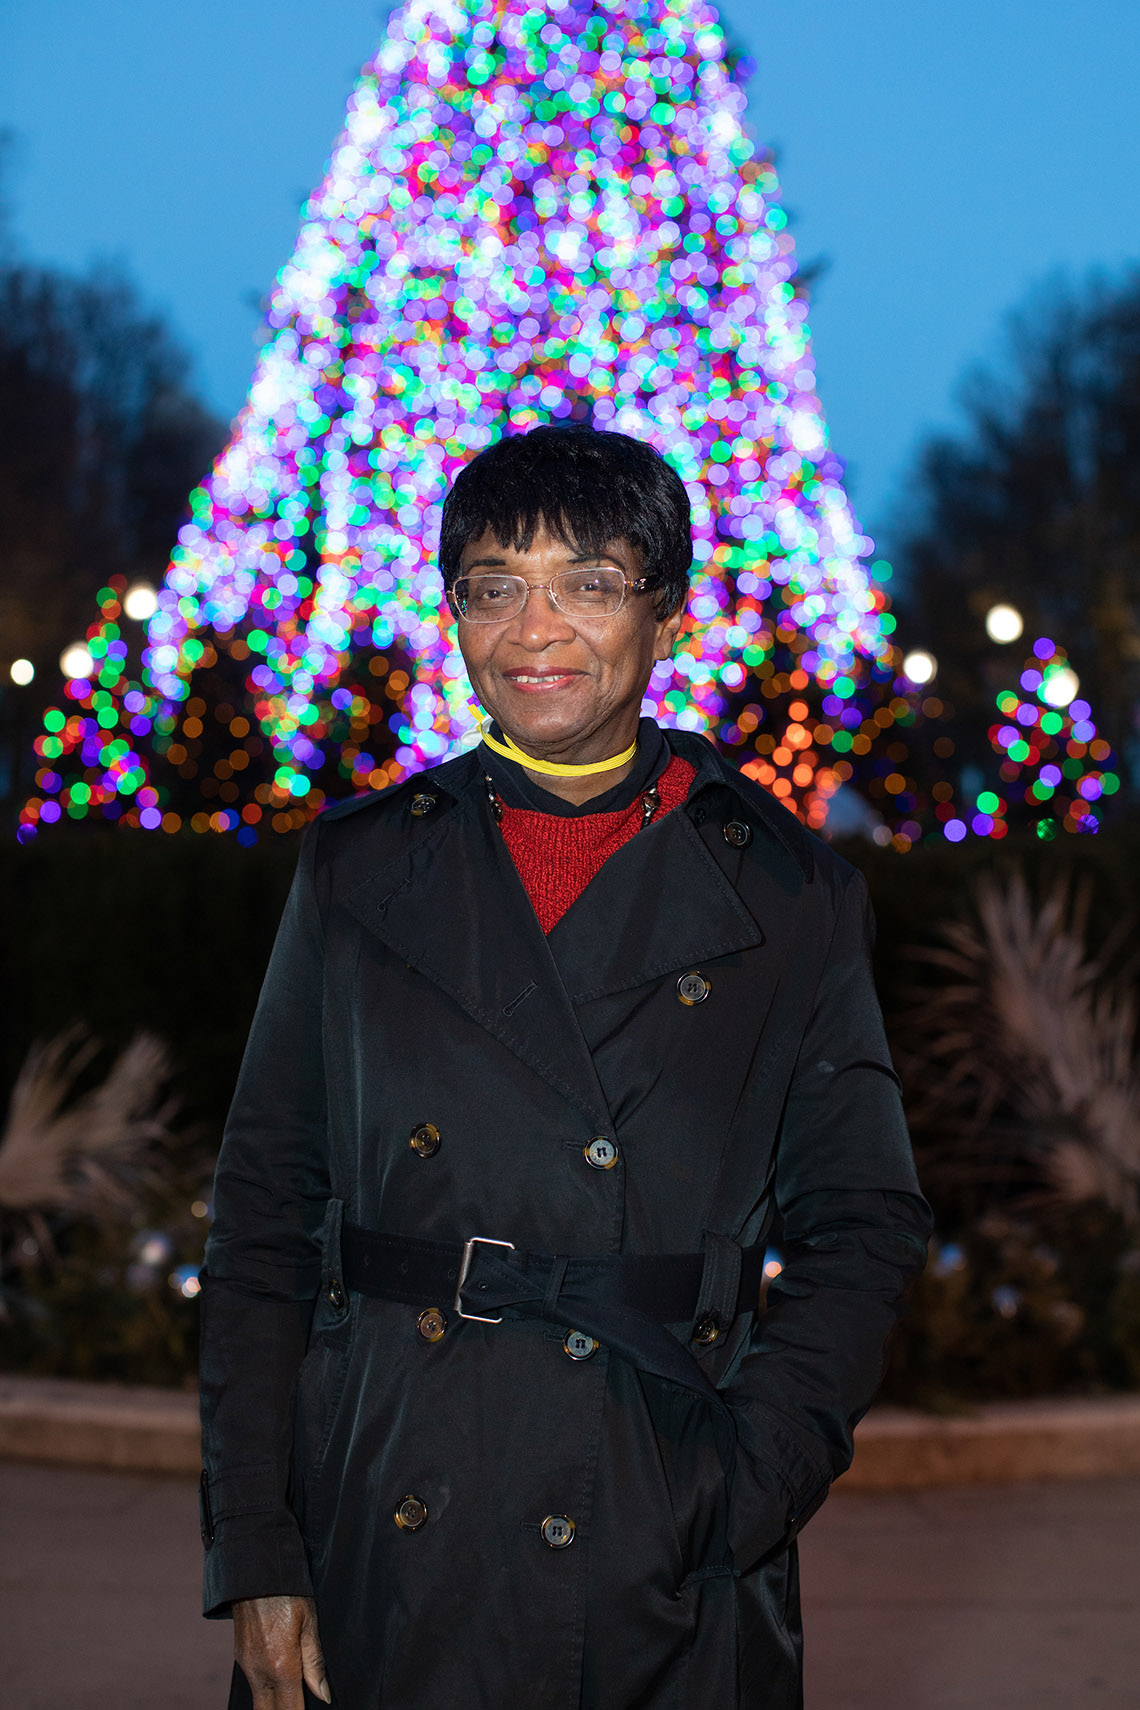 Catherine Townsend, 85, stands in front of a tree she grew from a sapling that was chosen by the City of Chicago for display in Millennium Park for the 2020 Christmas season.